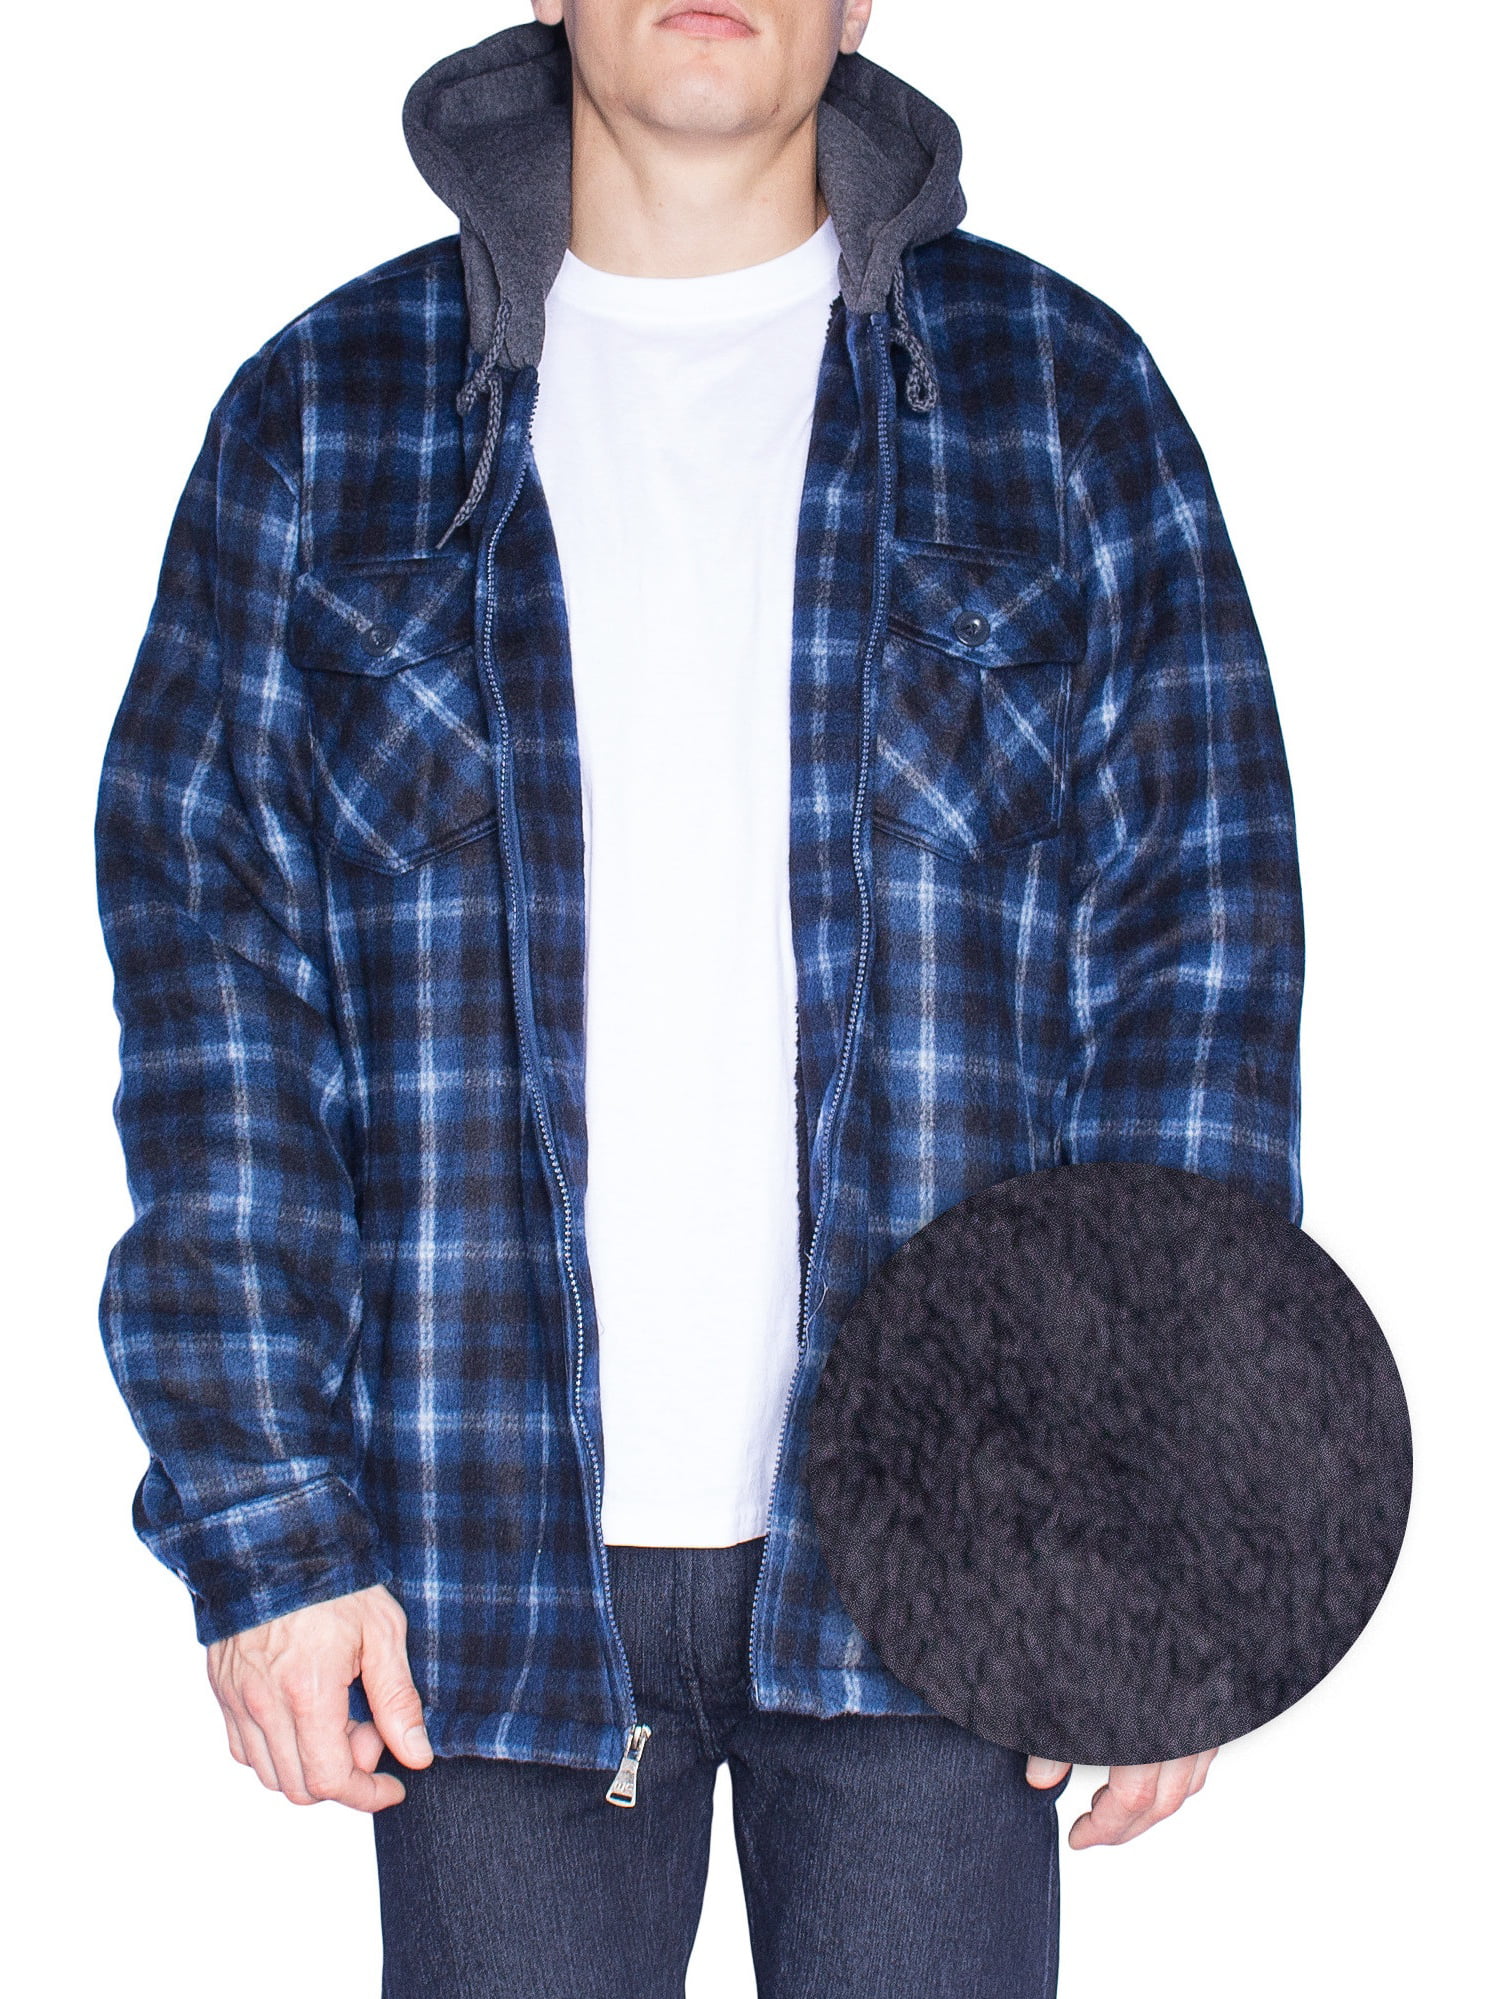 Hoodie Flannel Fleece Jacket For Men Zip Up Big & Tall Lined Sherpa Sweat Shirts (4X-Large,Blue